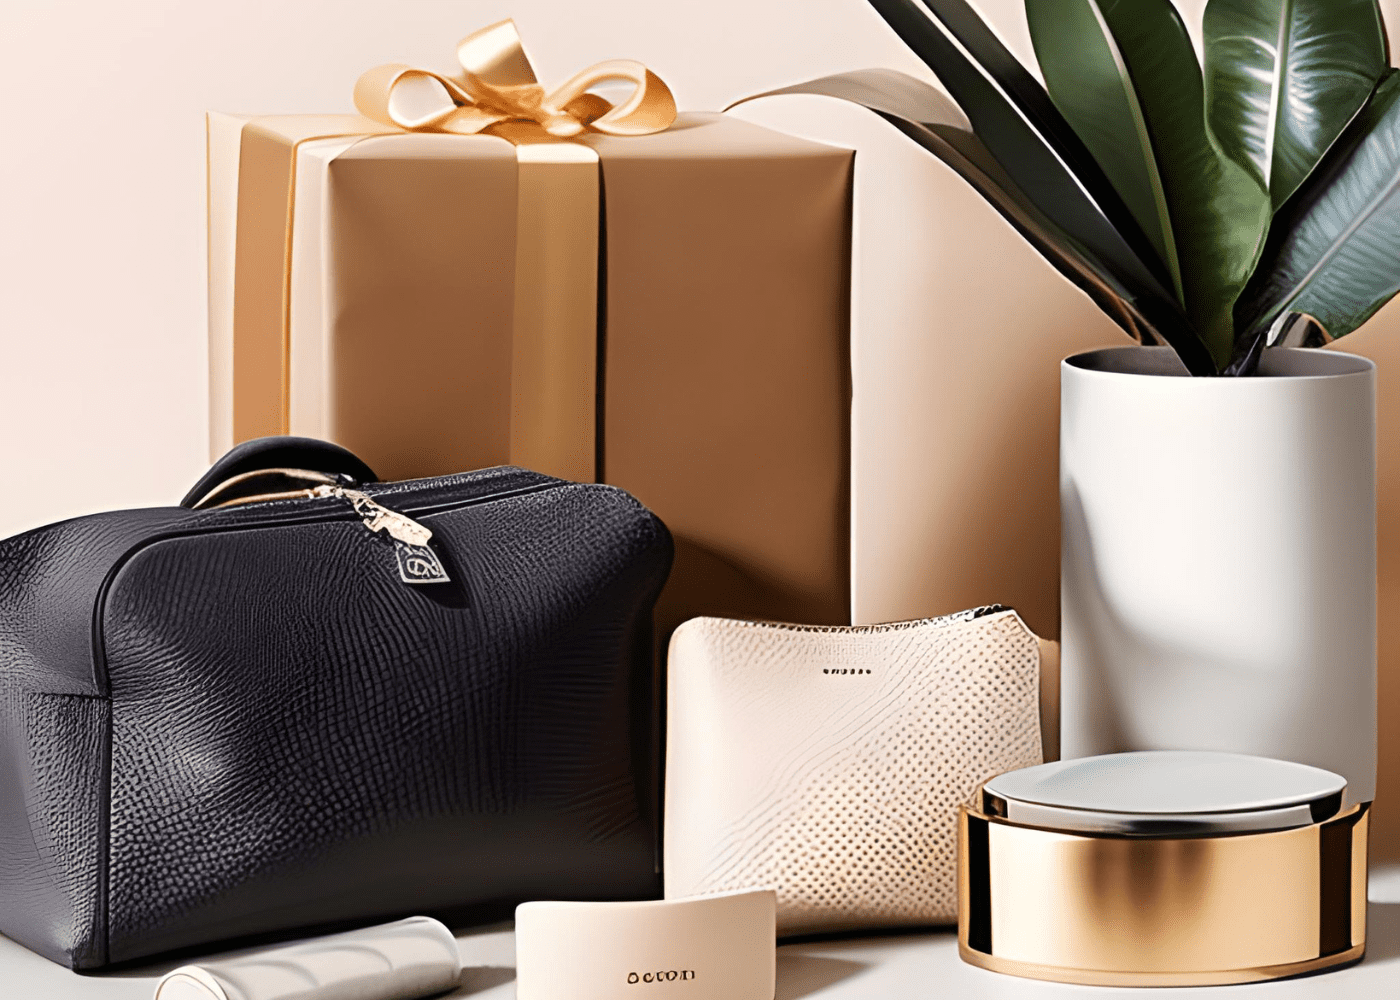 15+ gifts for women in their 30s